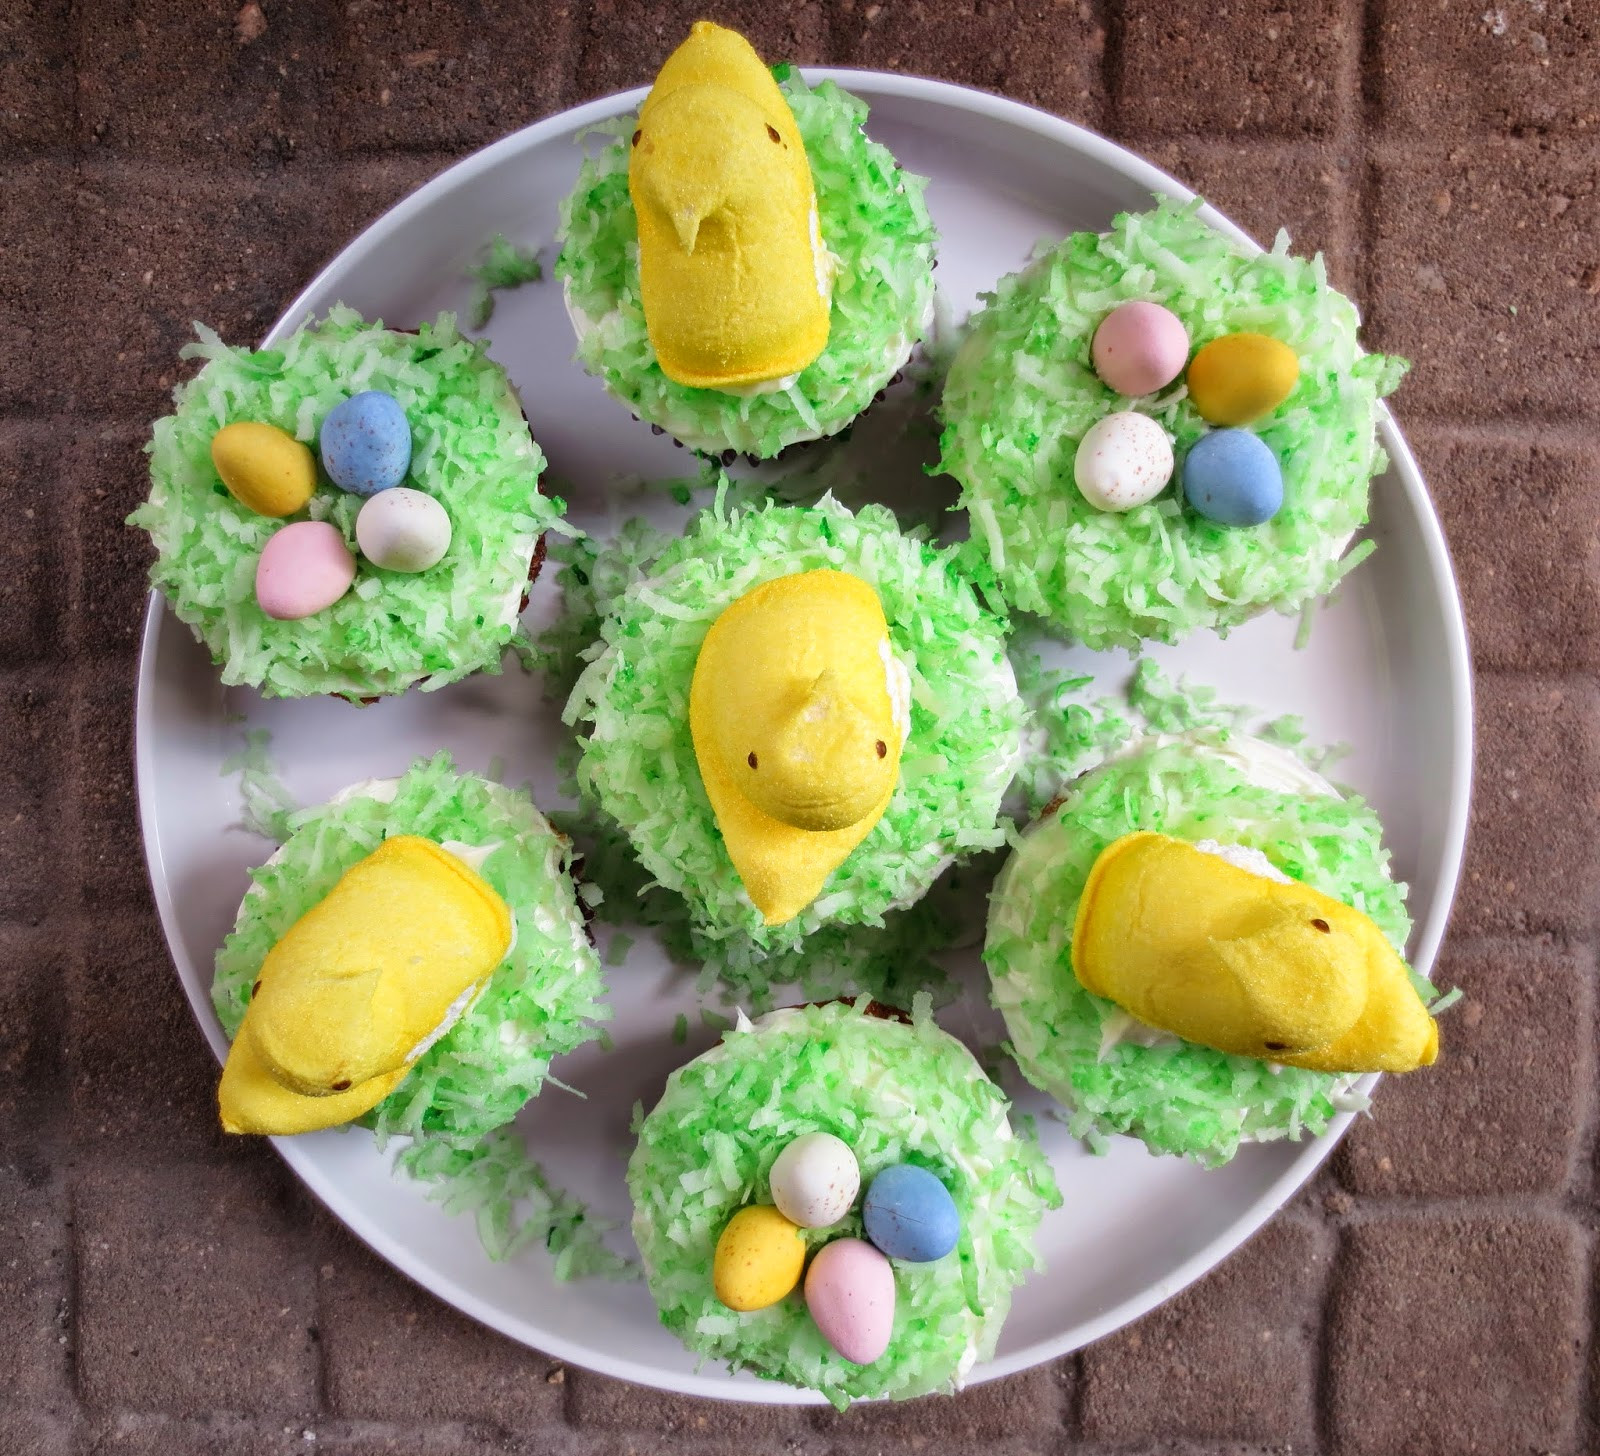 Easter Cupcake Decorating Ideas
 Eat with Grace Easter Cupcake Decorating Ideas